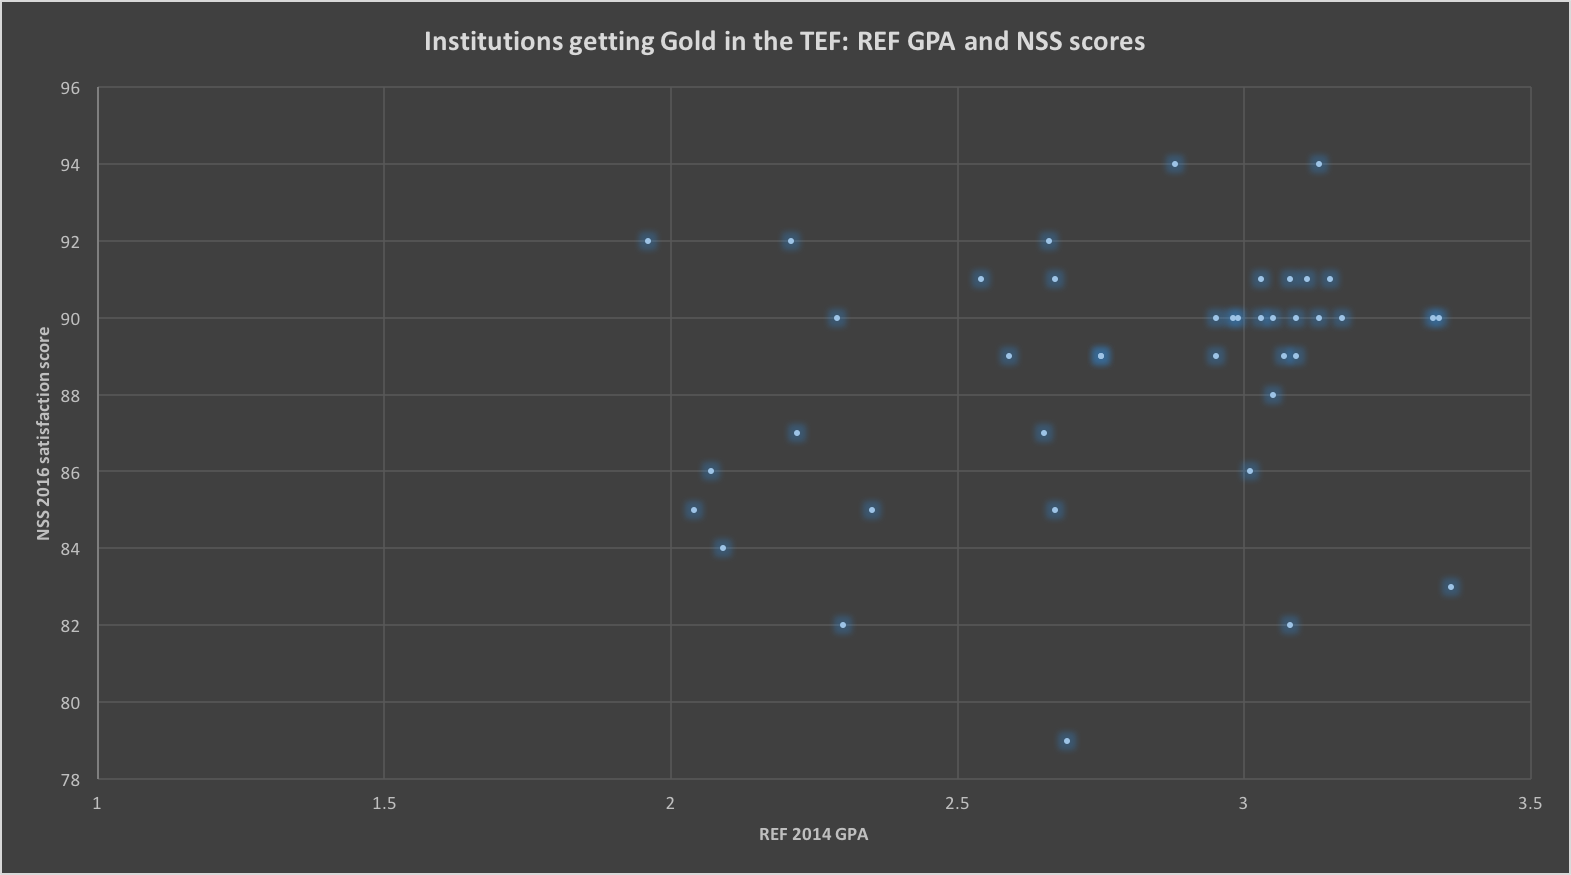 Institutions getting Gold in the TEF: NSS and REF scores